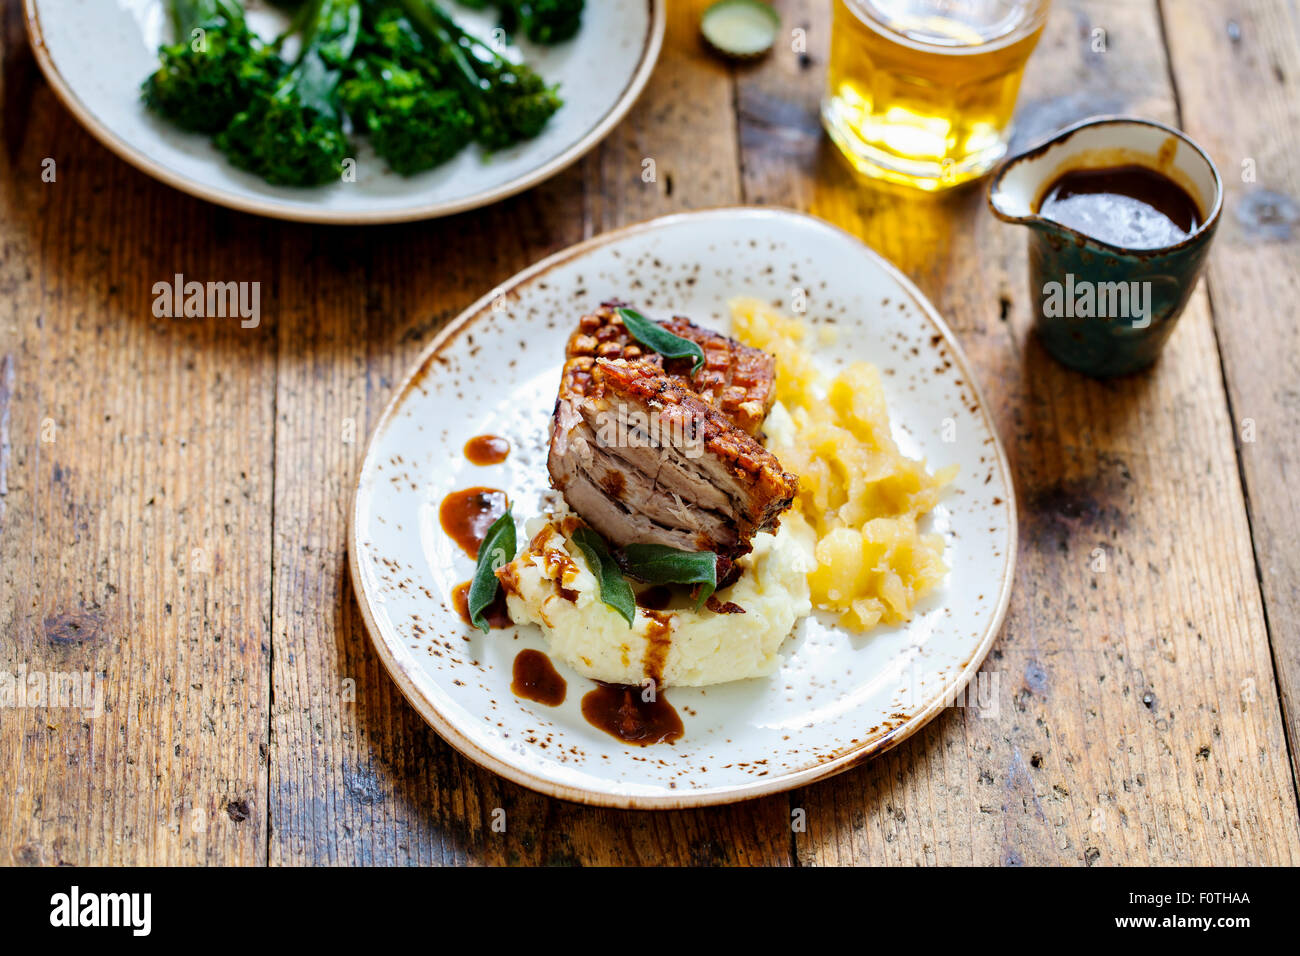 Pork belly with crackling, mashed potatoes, apple sauce and deep fried sage leaves Stock Photo